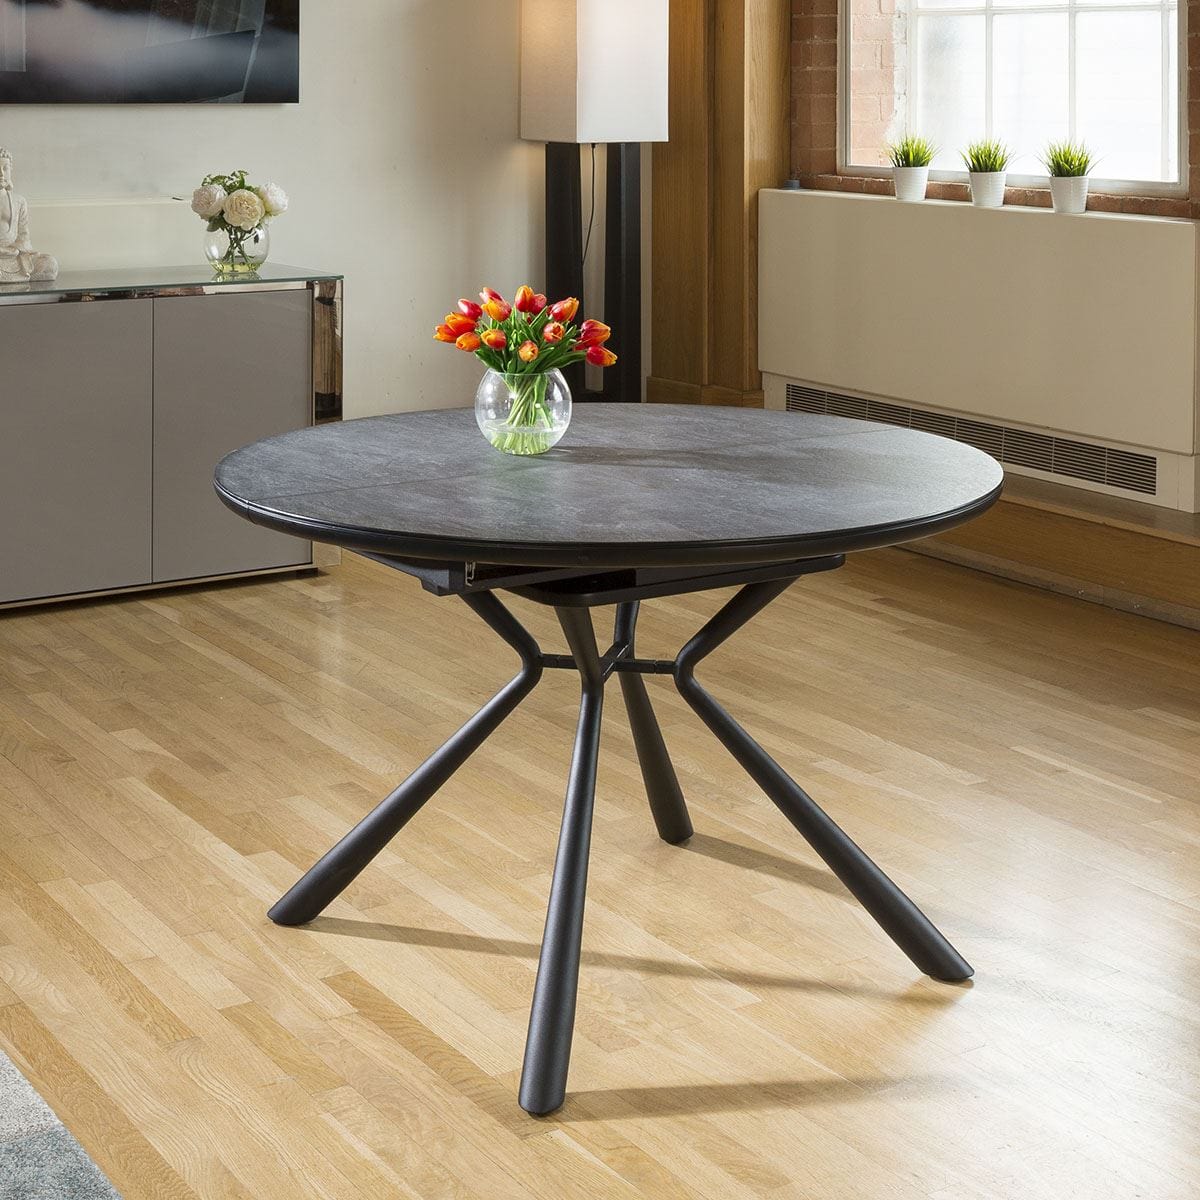 Quatropi Round Slate Effect Melamine Dining Table Extends +6 Grey Fabric Chairs